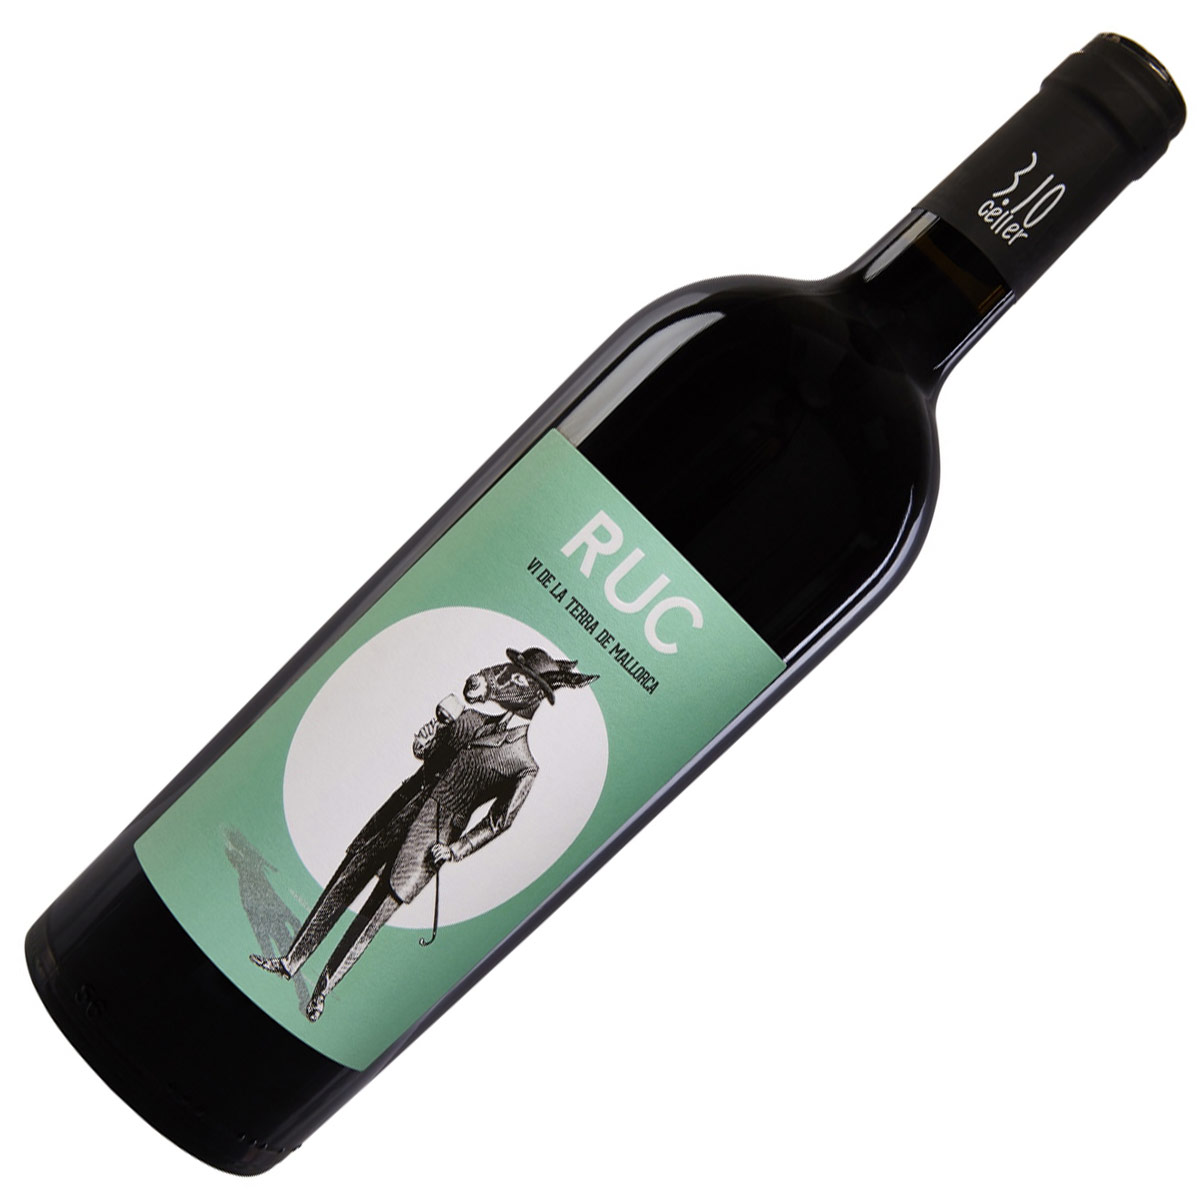 3.10 Celler Ruc Eco Red wine